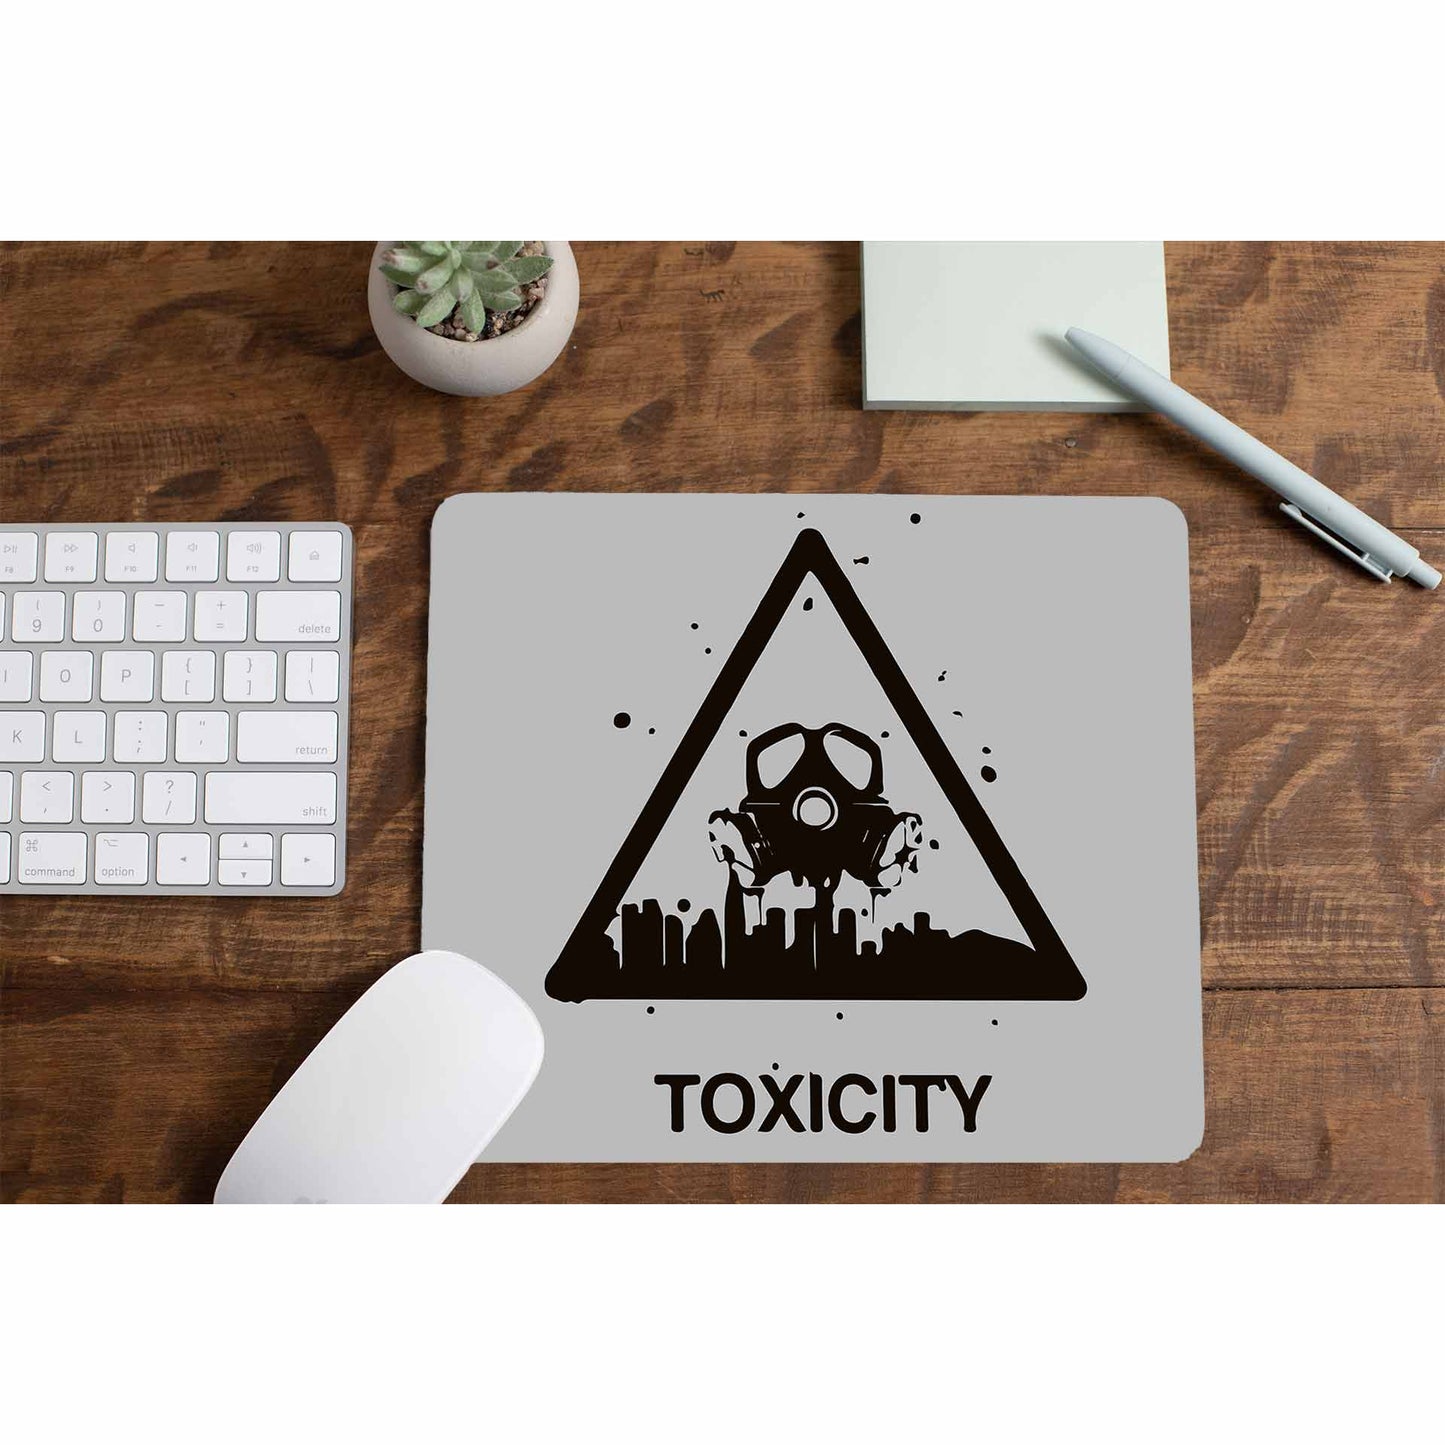 system of a down toxicity mousepad logitech large anime music band buy online united states of america usa the banyan tee tbt men women girls boys unisex